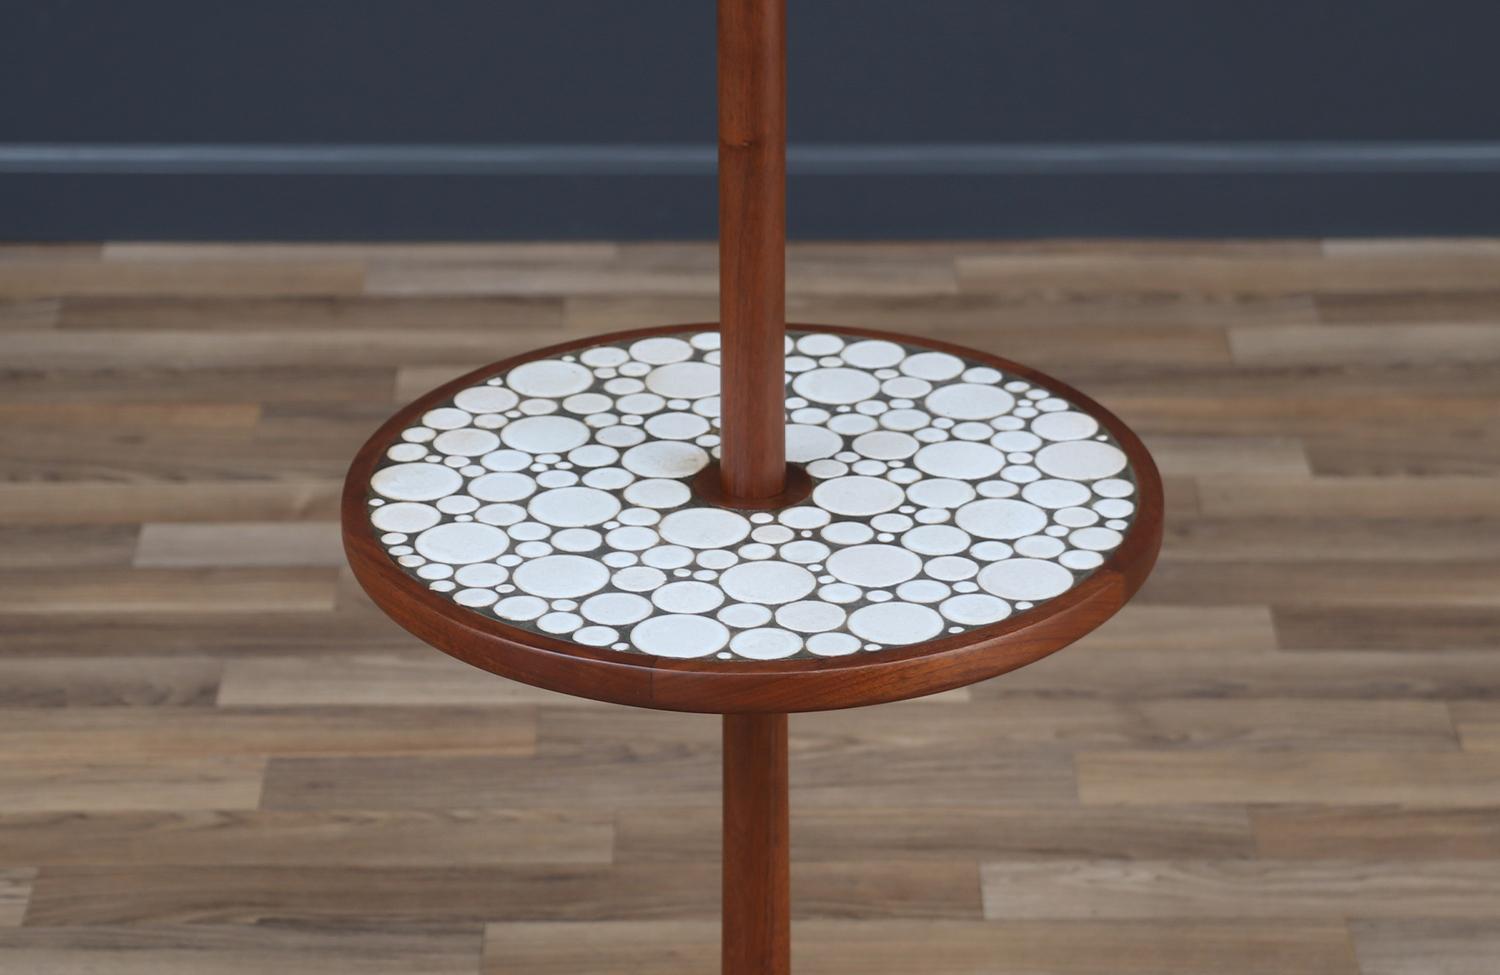 American Expertly Restored - Gordon & Jane Martz Floor Lamp with Mosaic Tile Side Table For Sale